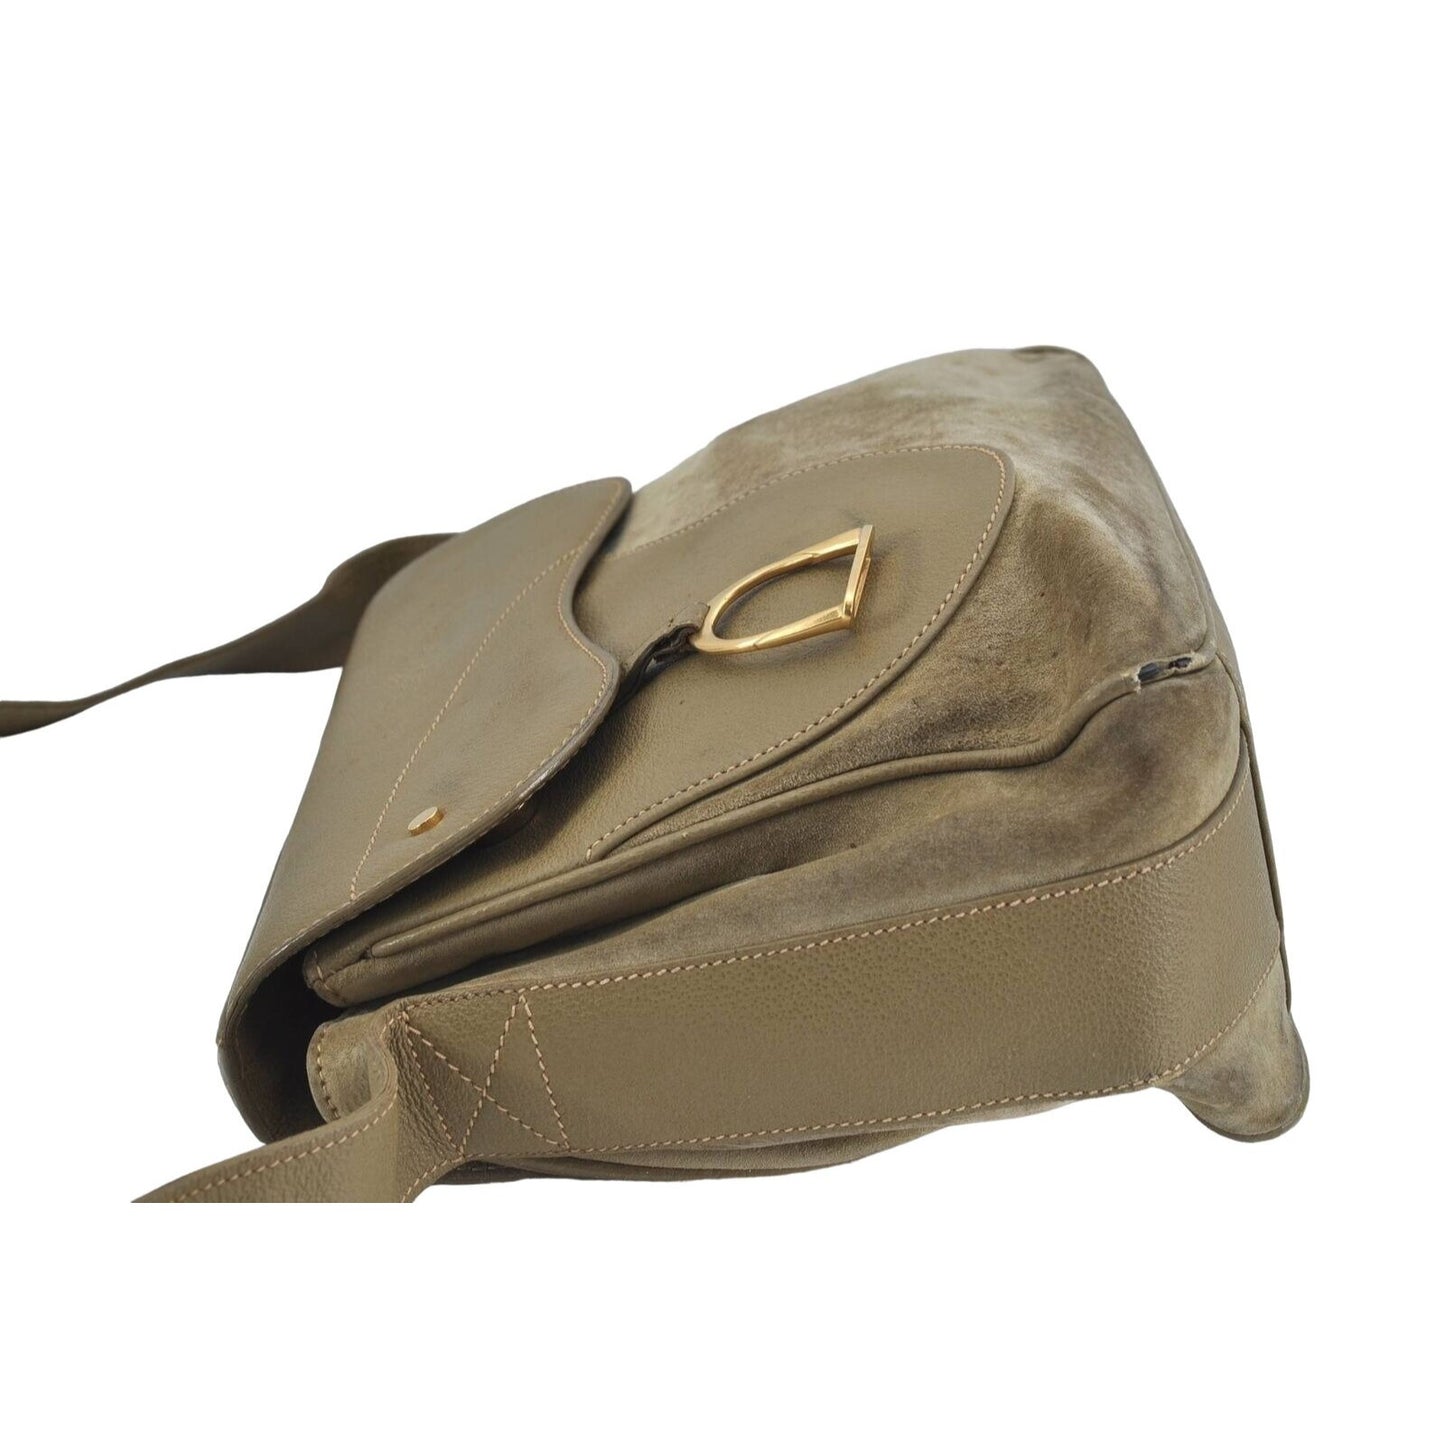 Gucci Stirrup style olive green suede and leather saddle bag cross body or shoulder bag with a gold stirrup accent!